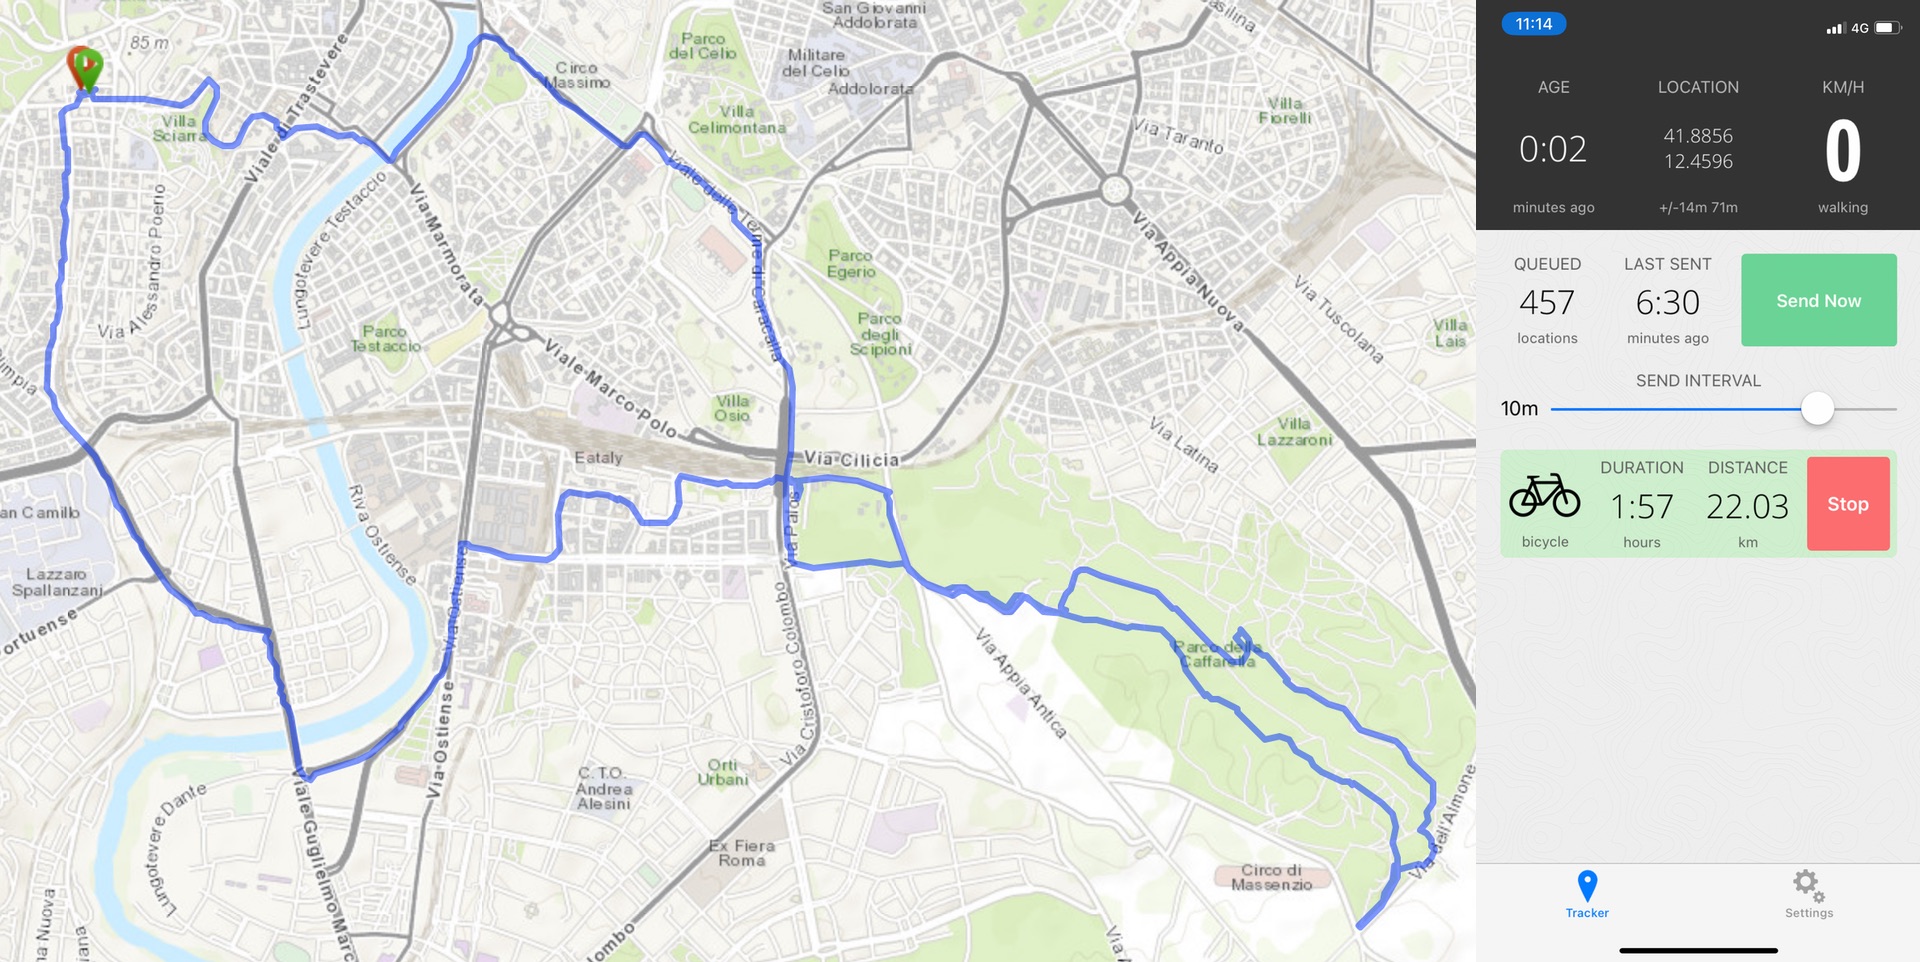 Graphic showing the route taken on the left and the summary details for the trip on the right